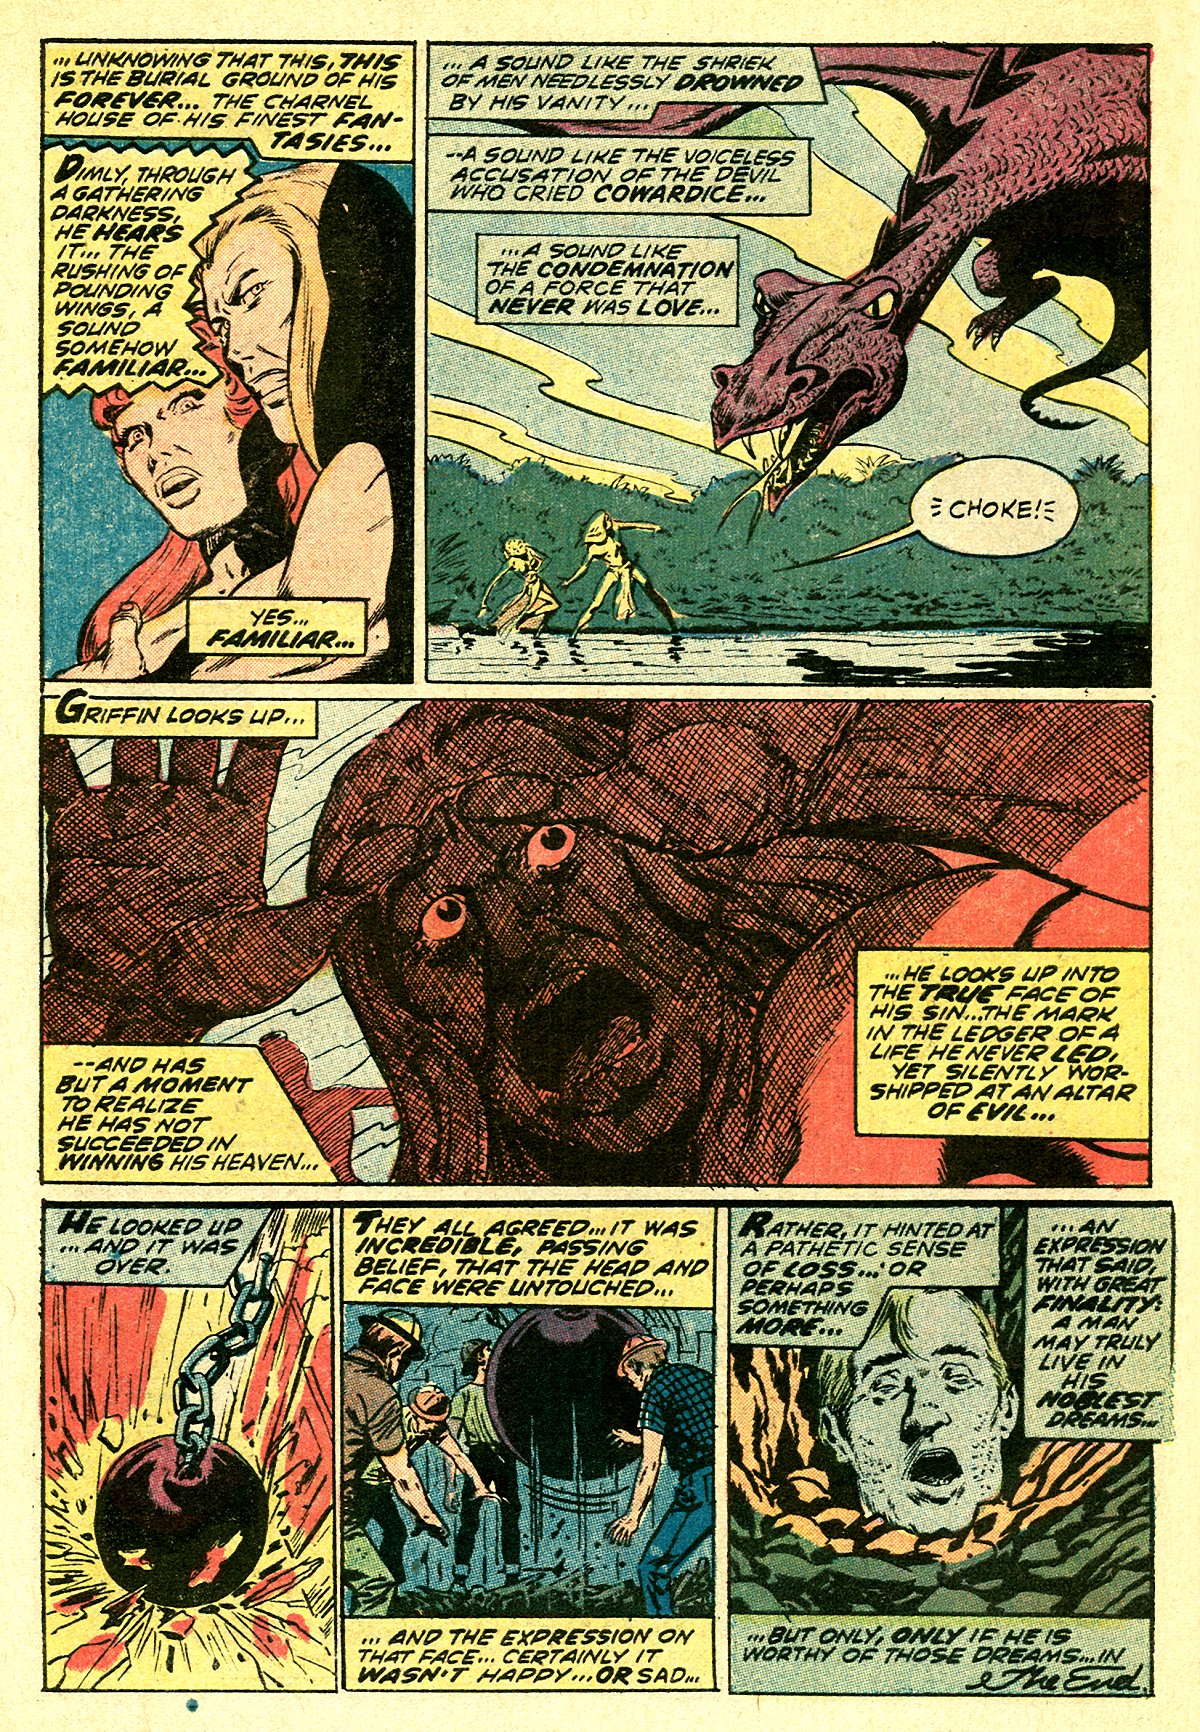 Chamber of Chills (1972) 1 Page 29